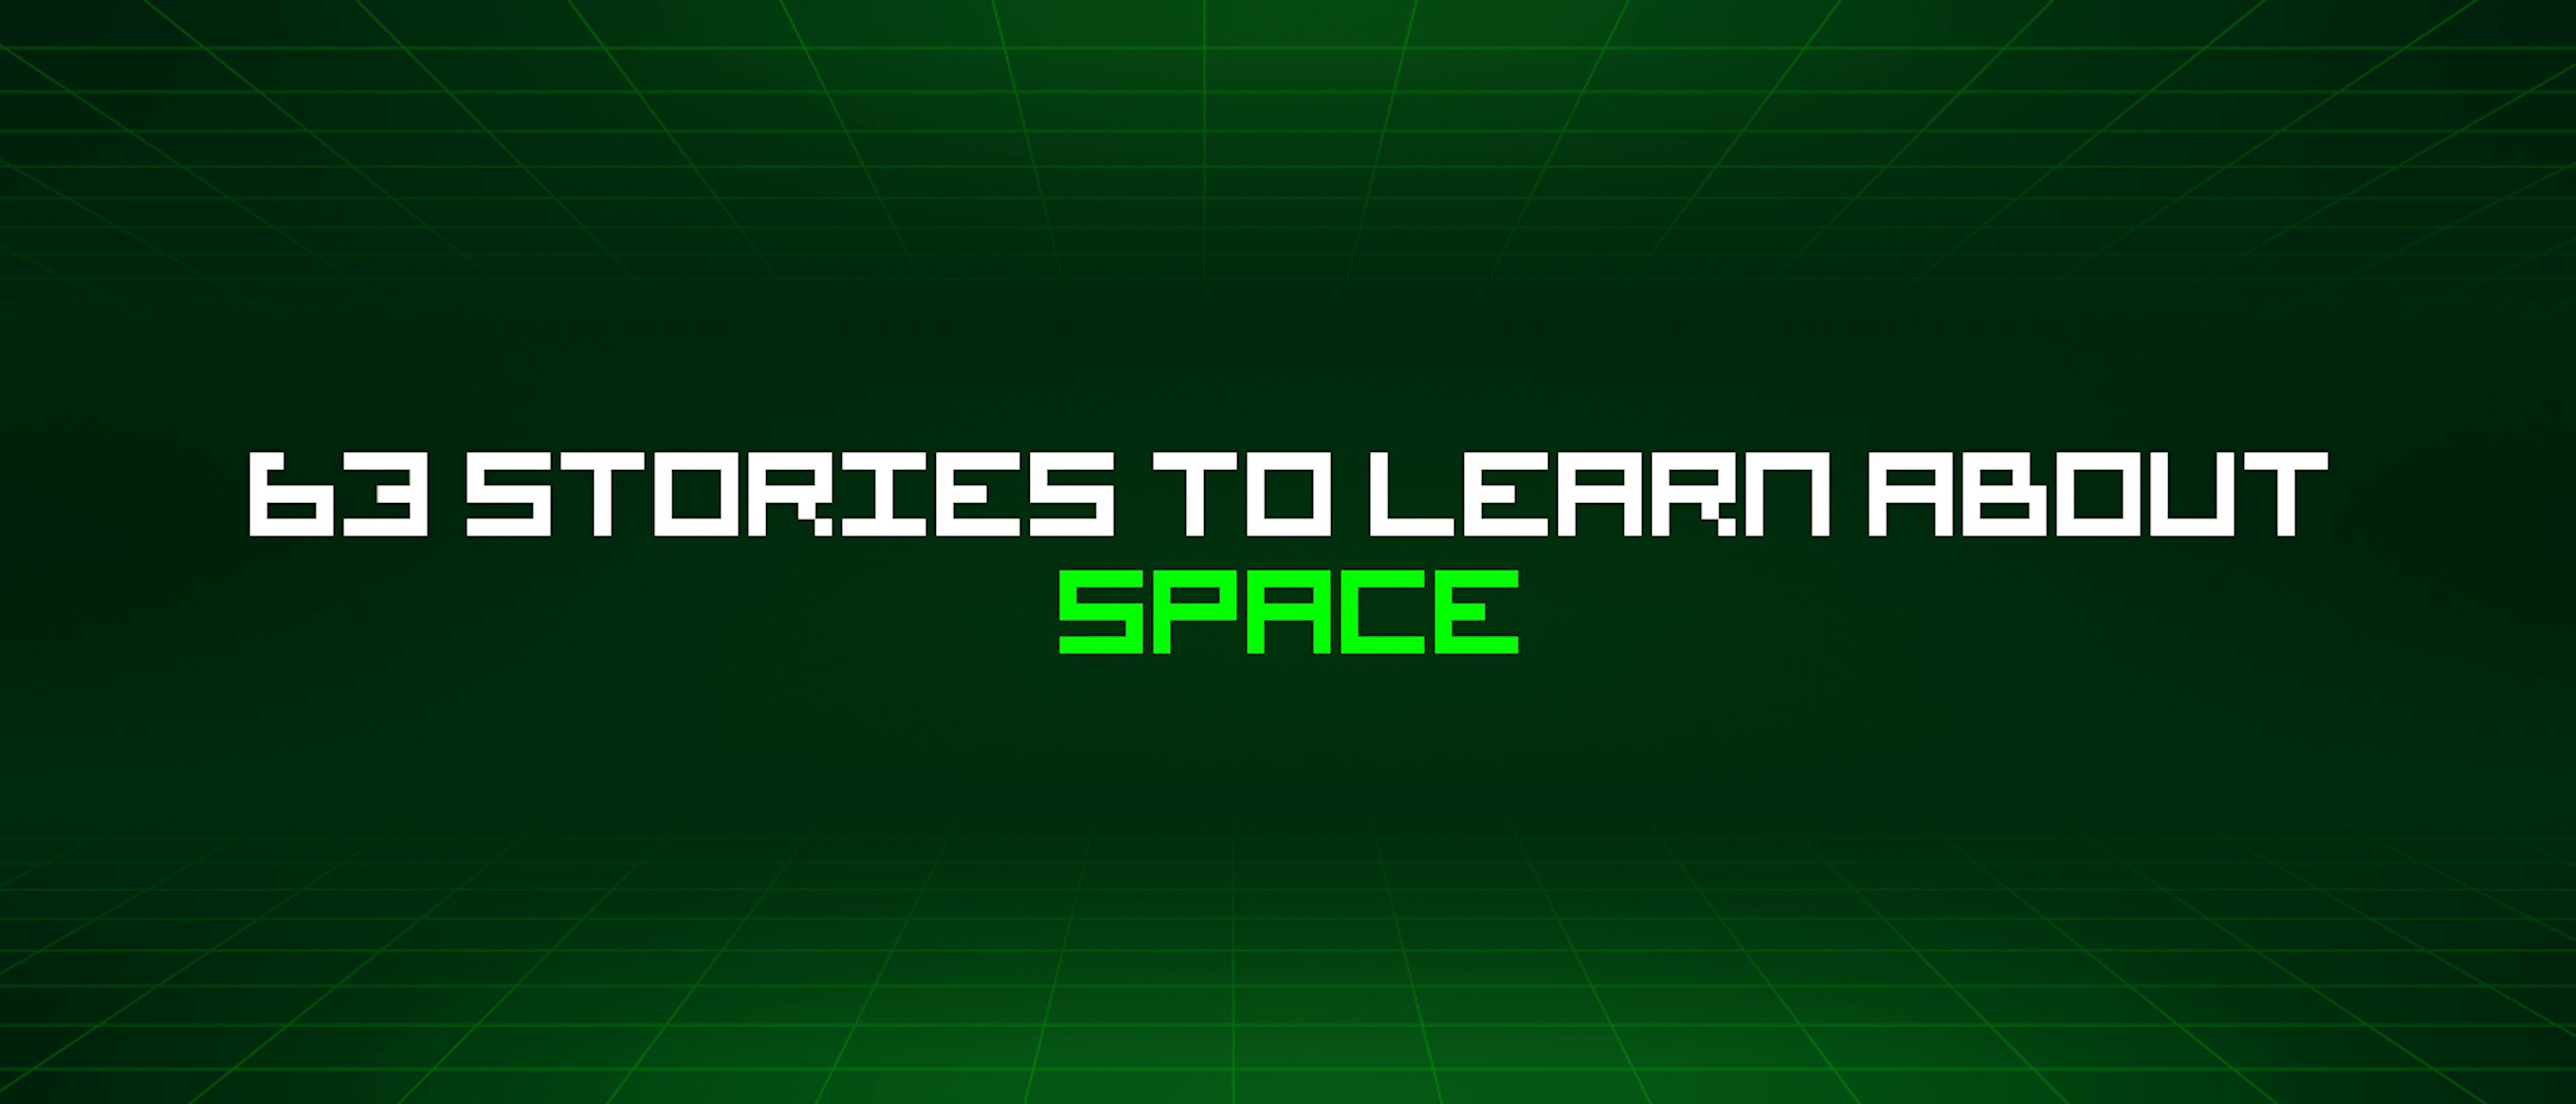 featured image - 63 Stories To Learn About Space